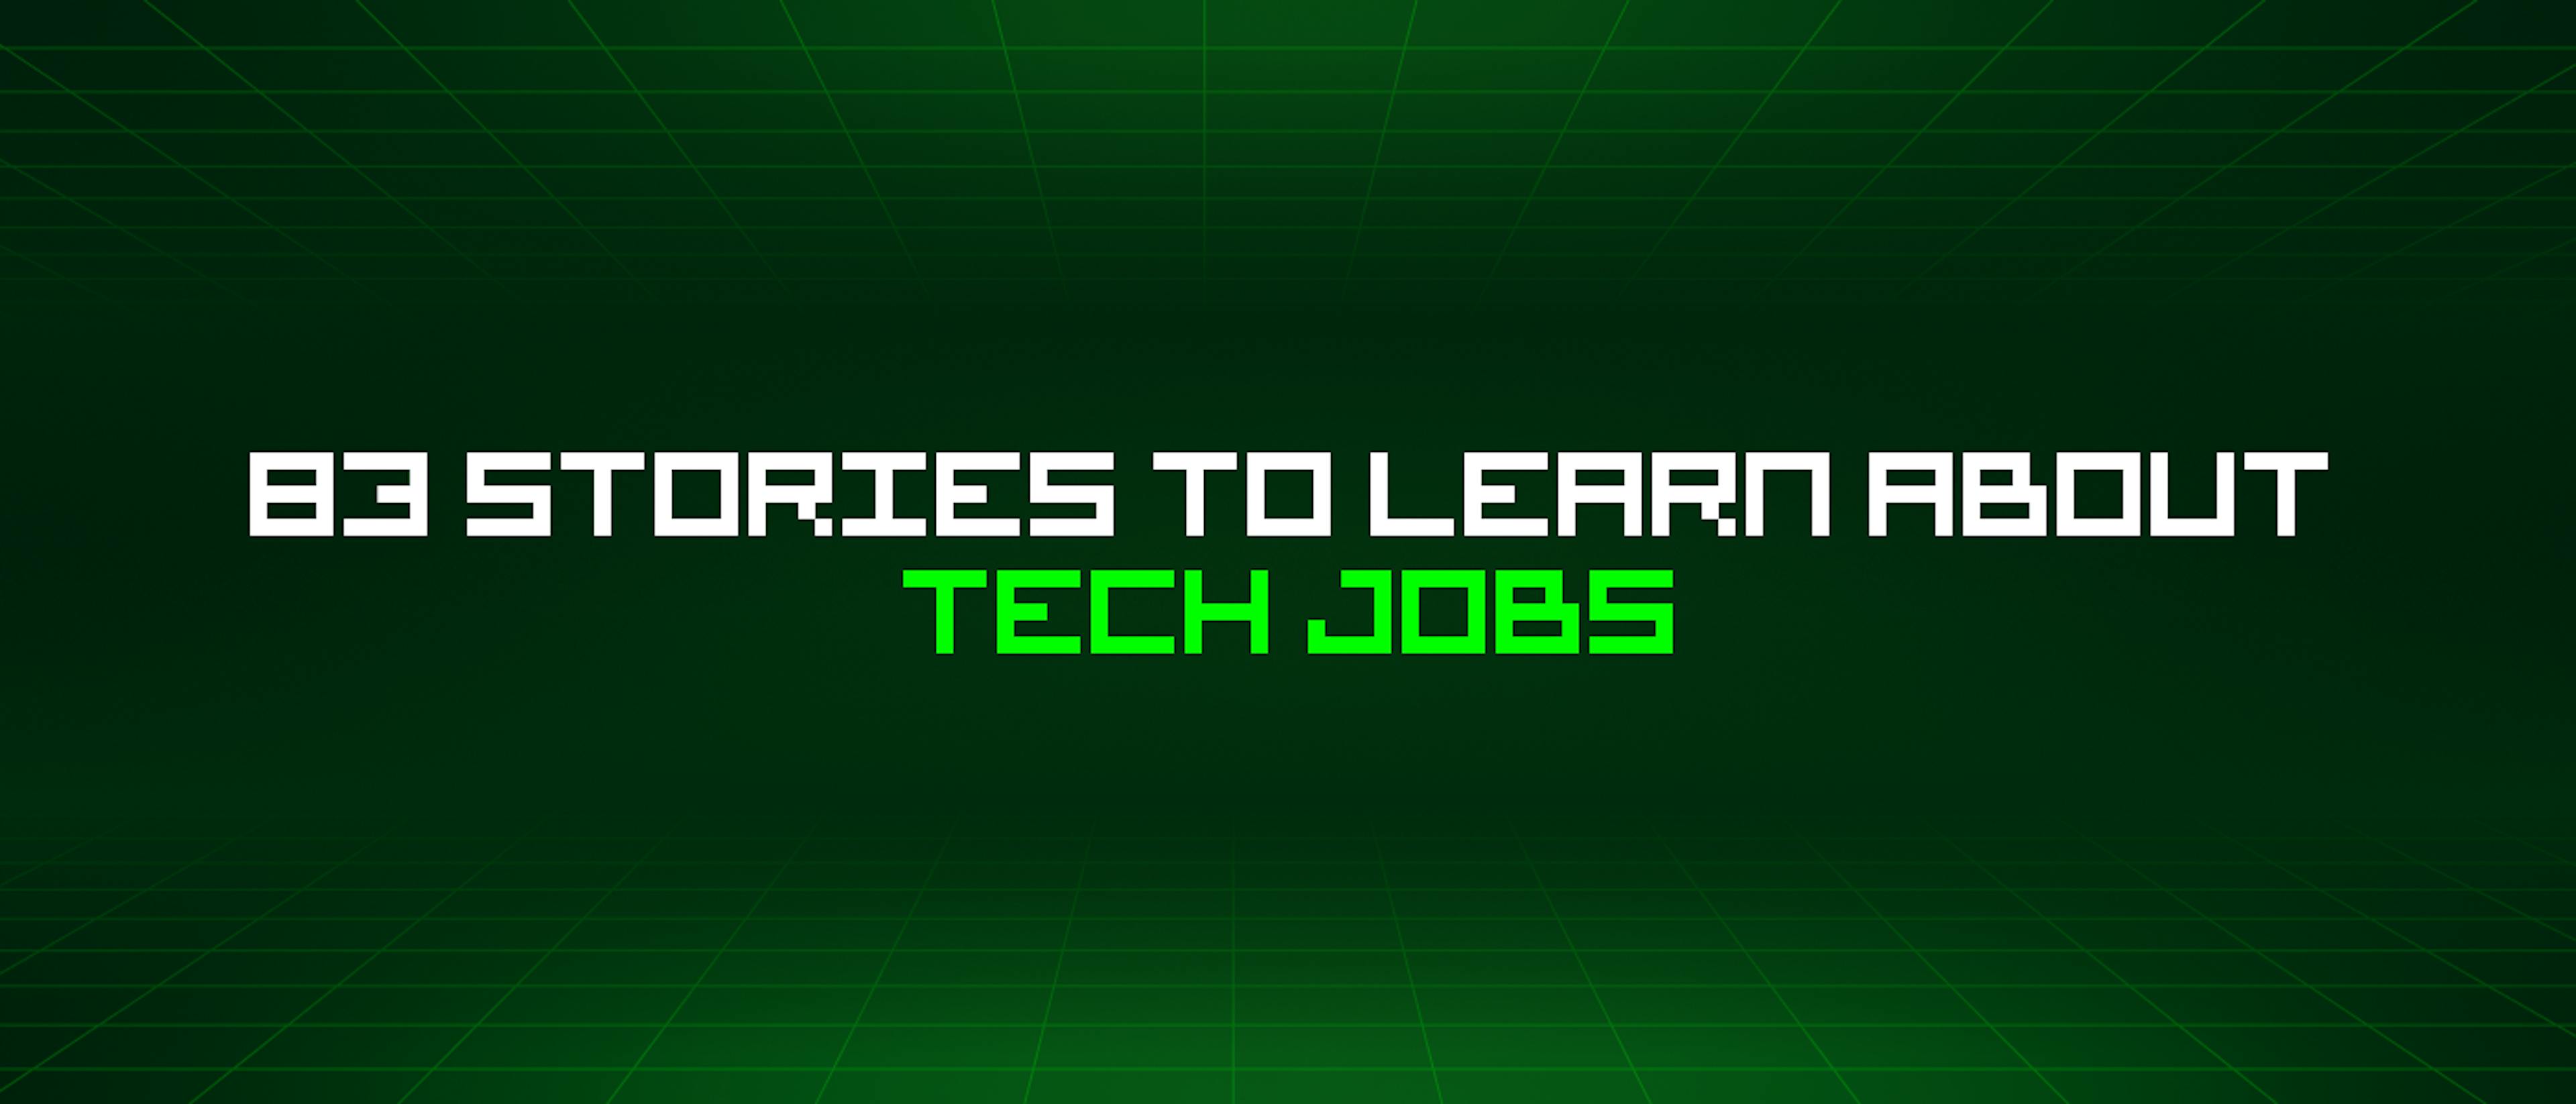 featured image - 83 Stories To Learn About Tech Jobs